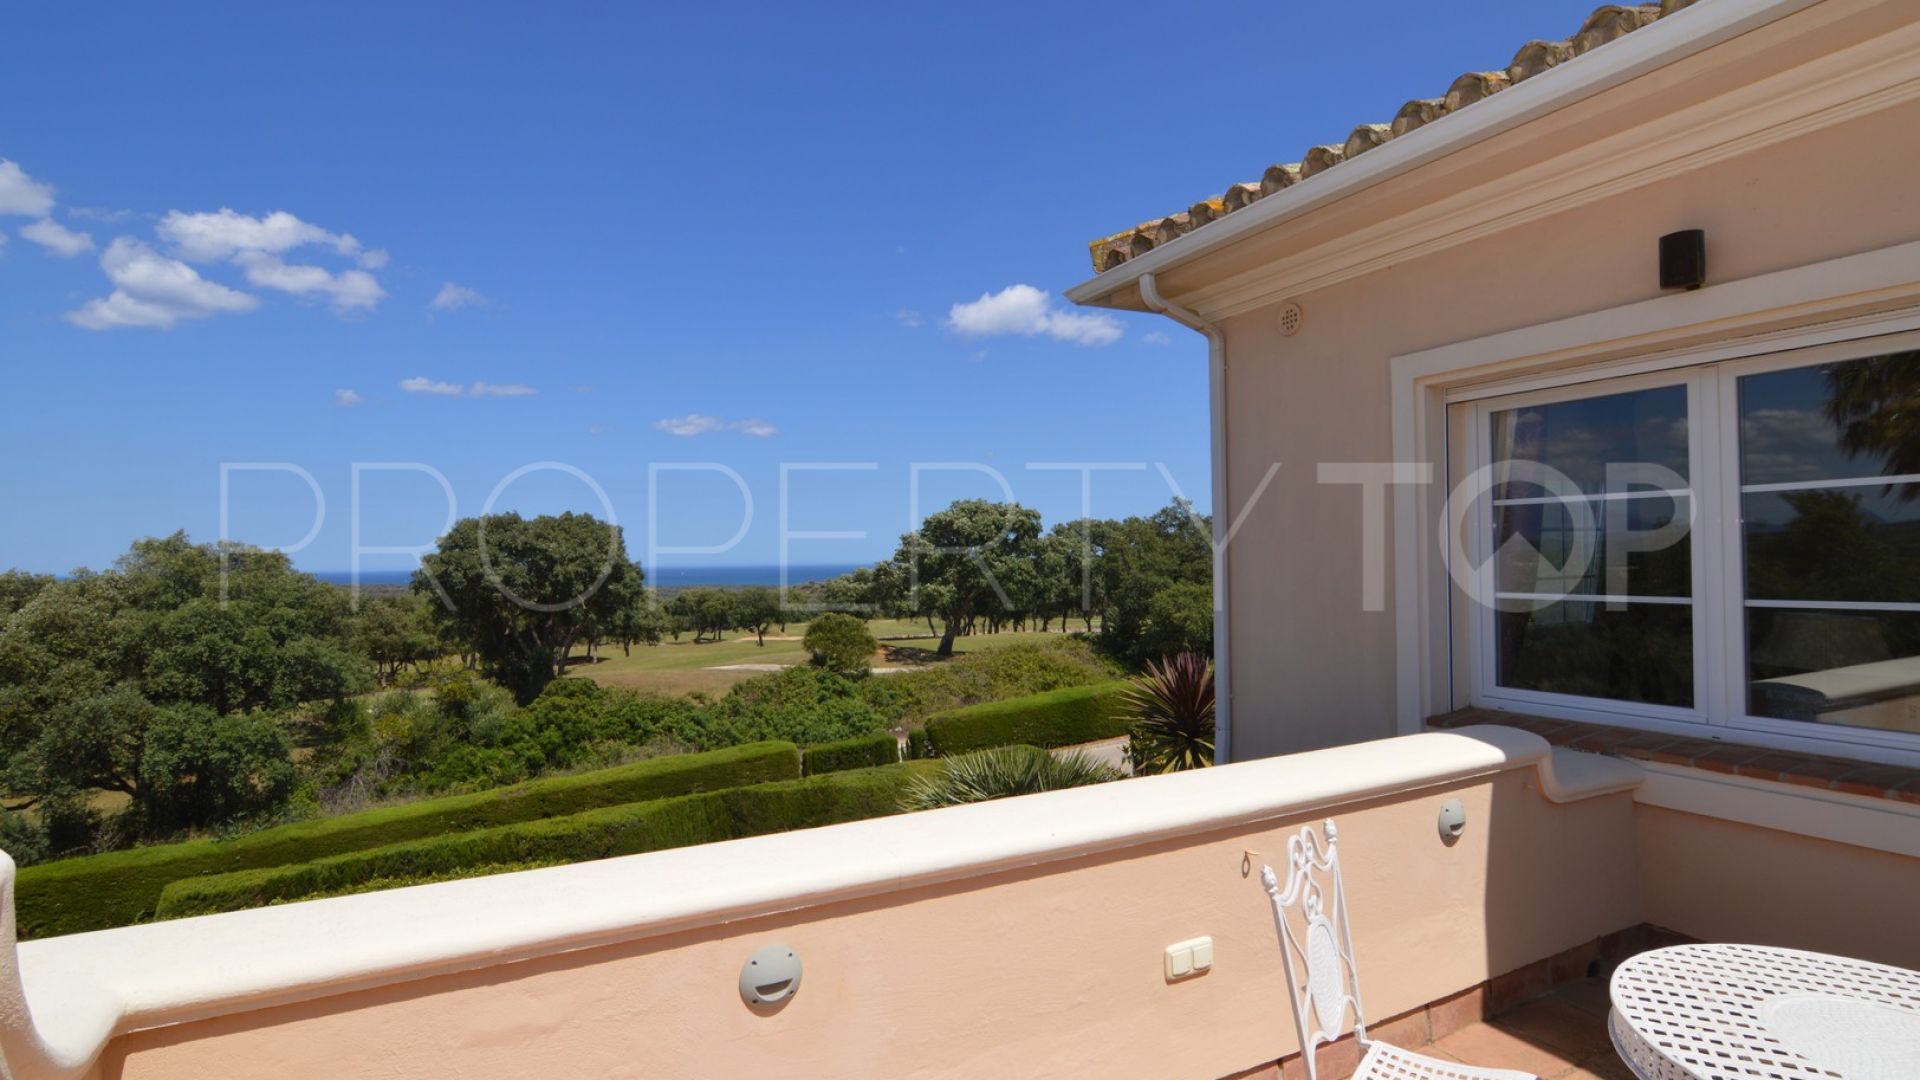 For sale villa with 7 bedrooms in San Roque Club